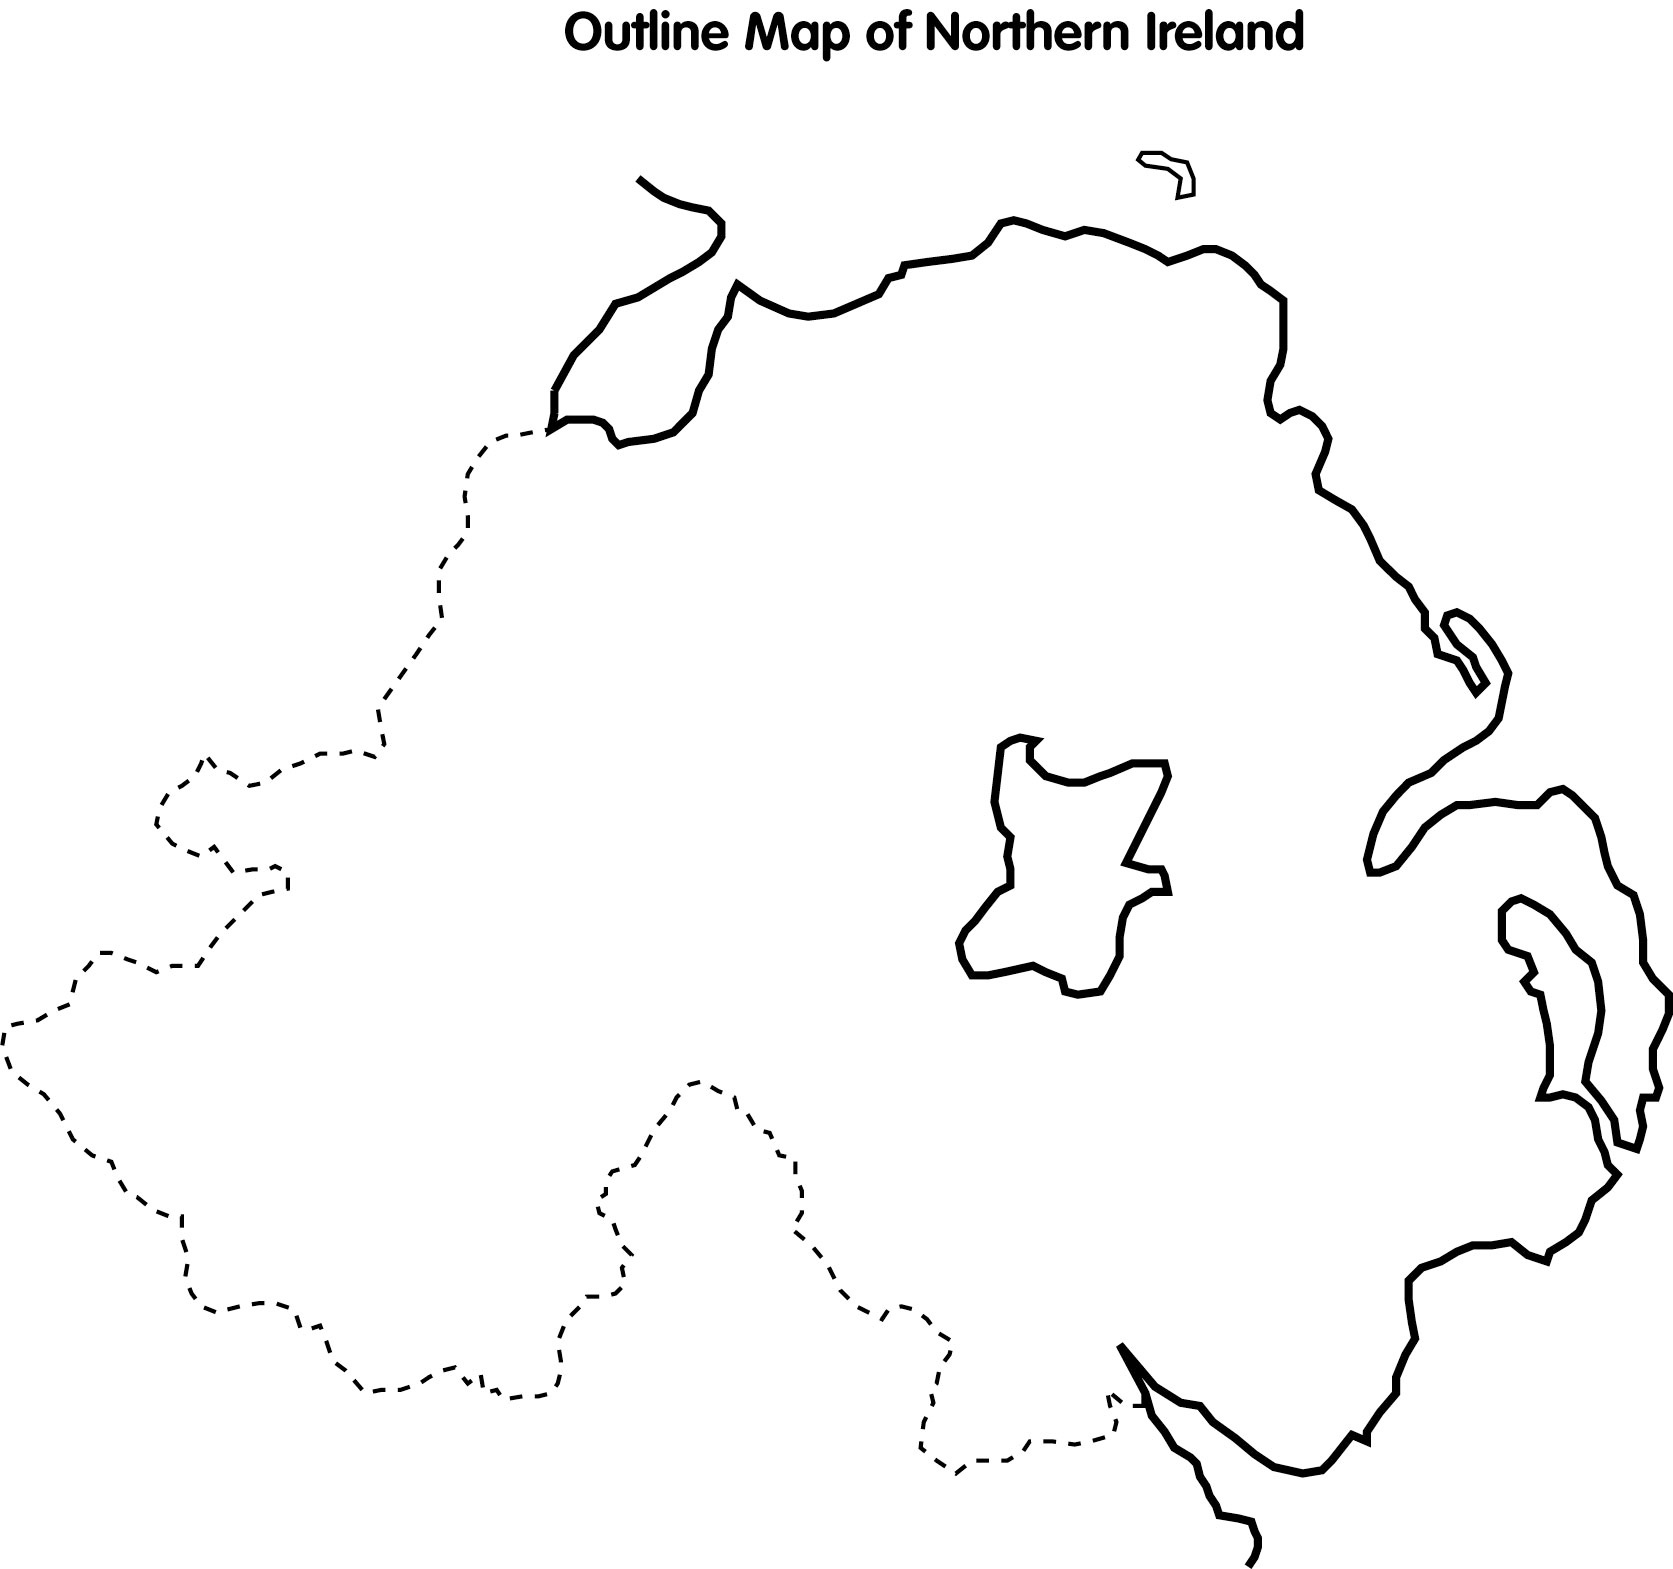 CAIN: Maps: Outline Map of Northern Ireland; small map